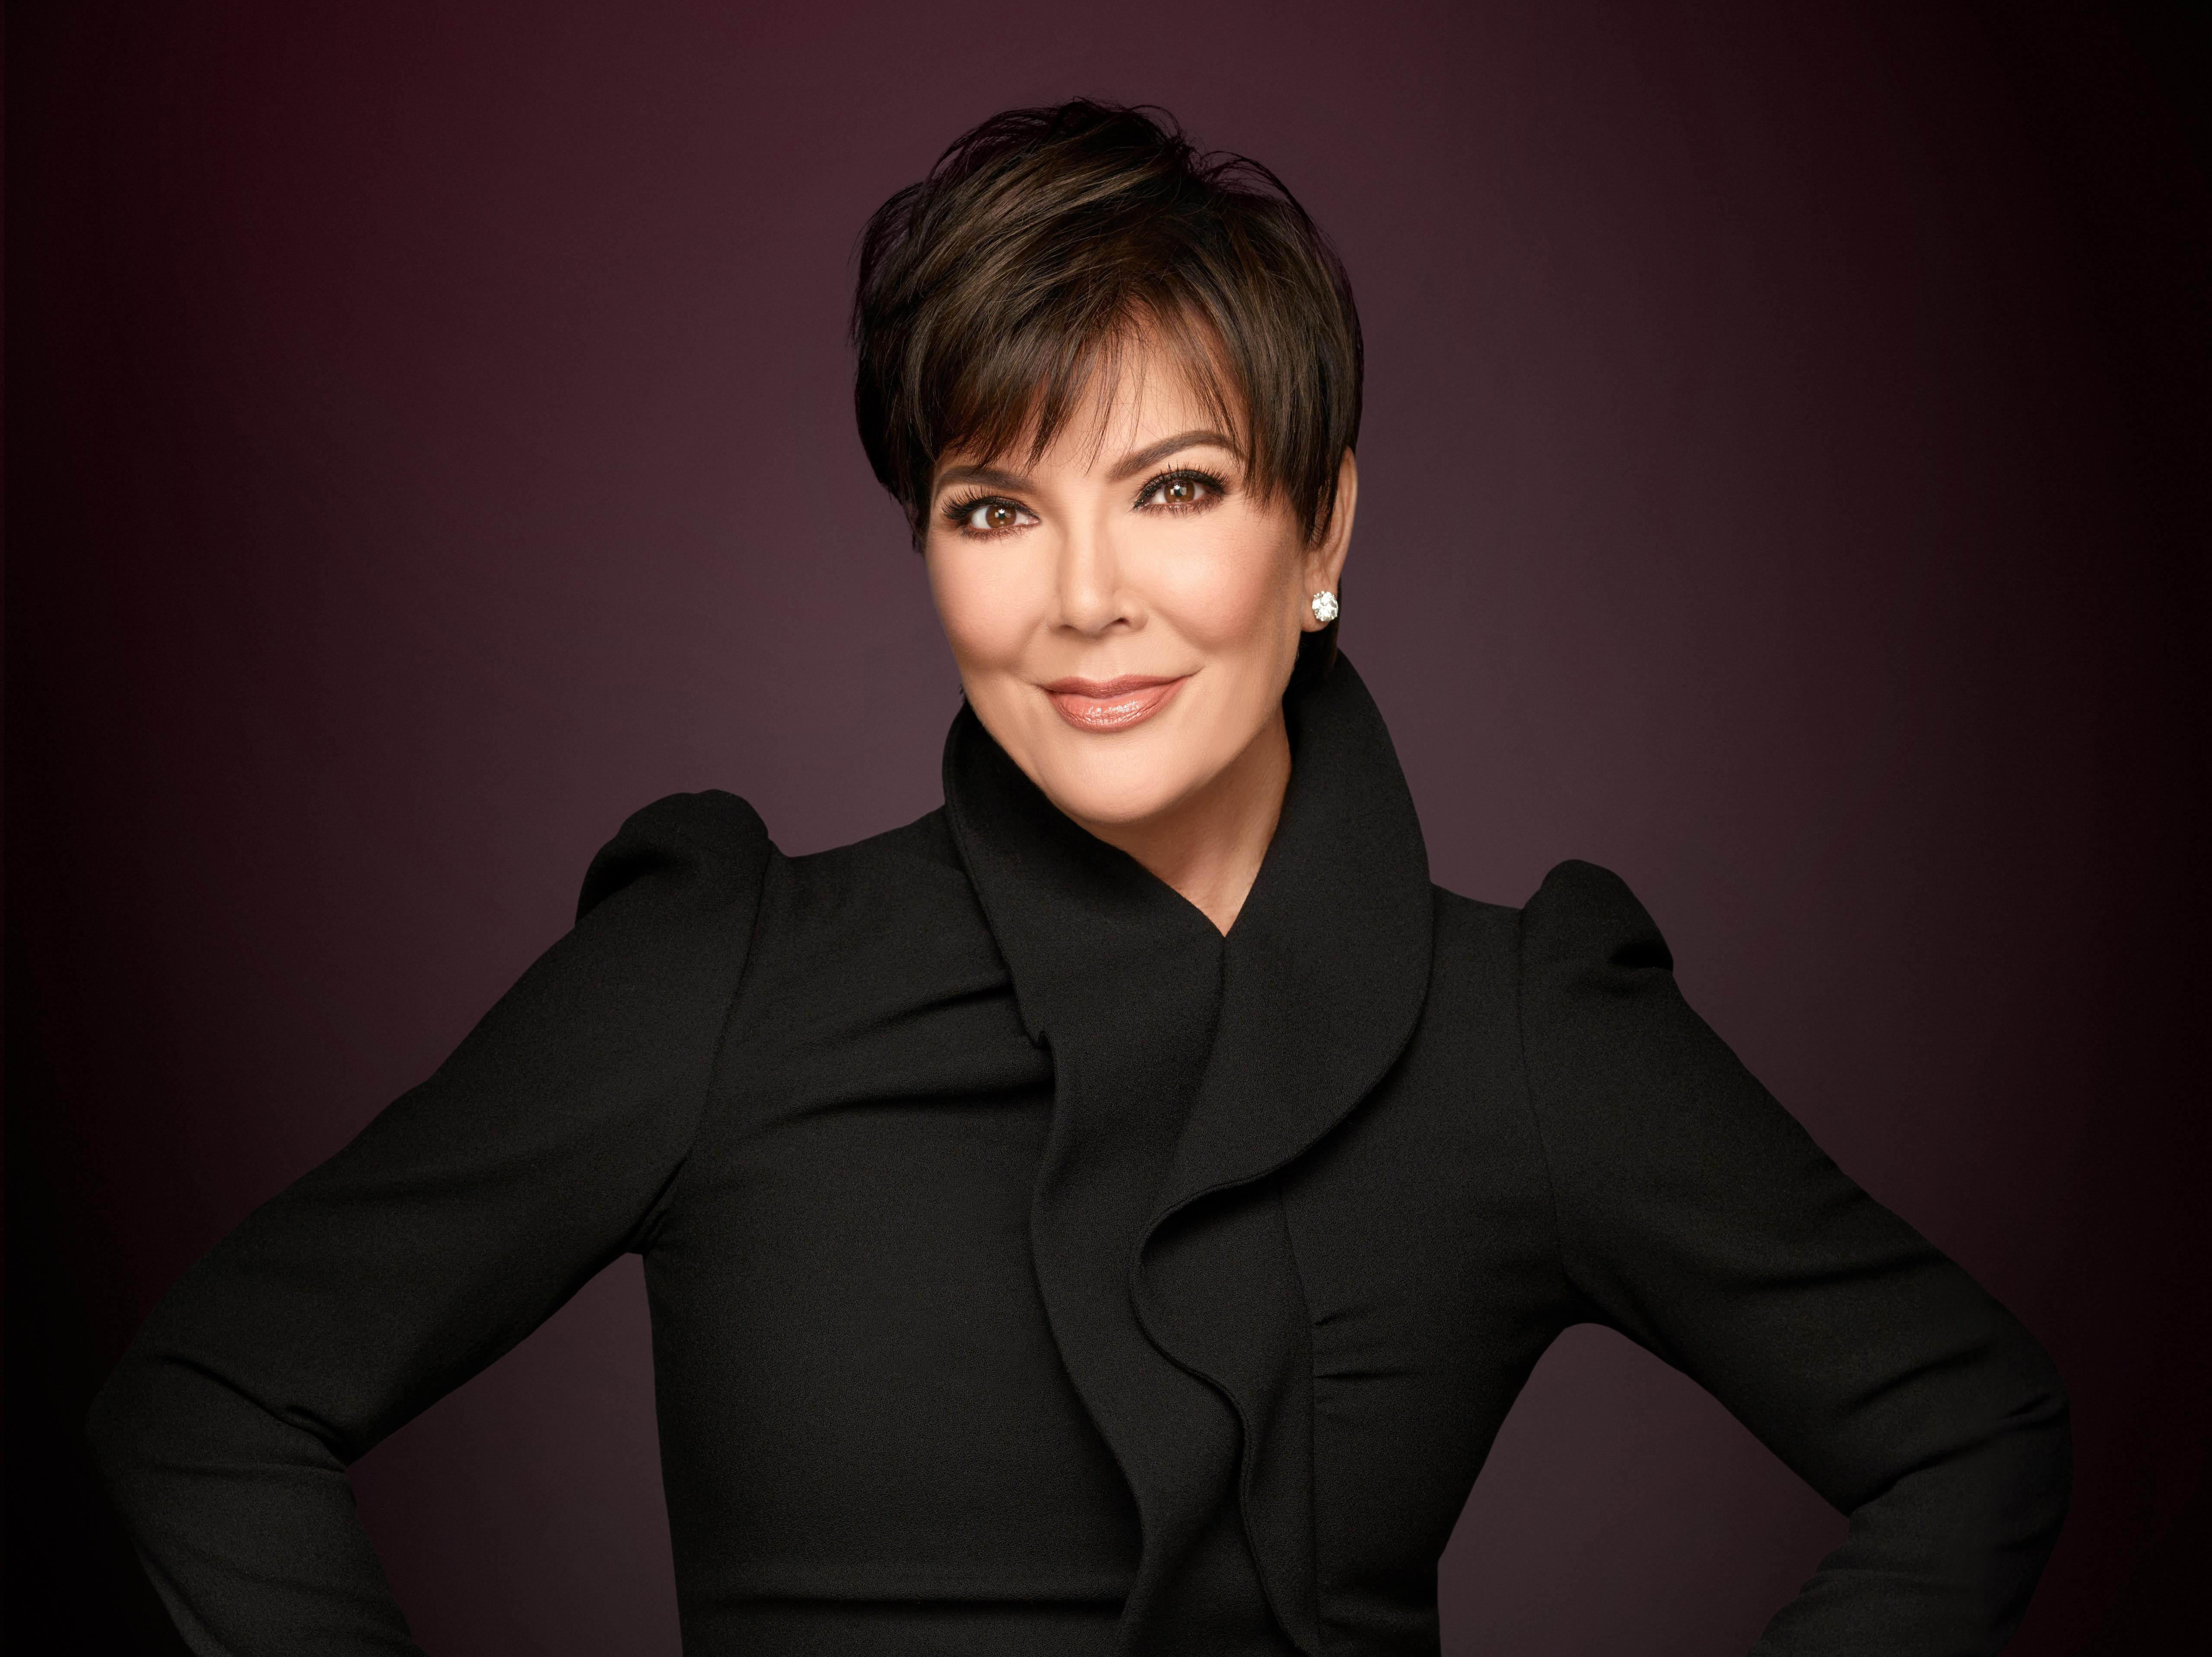 Kris Jenner Keeping Up With The Kardashians Season 14 2017 Hd Tv Shows 4k Wallpapers Images